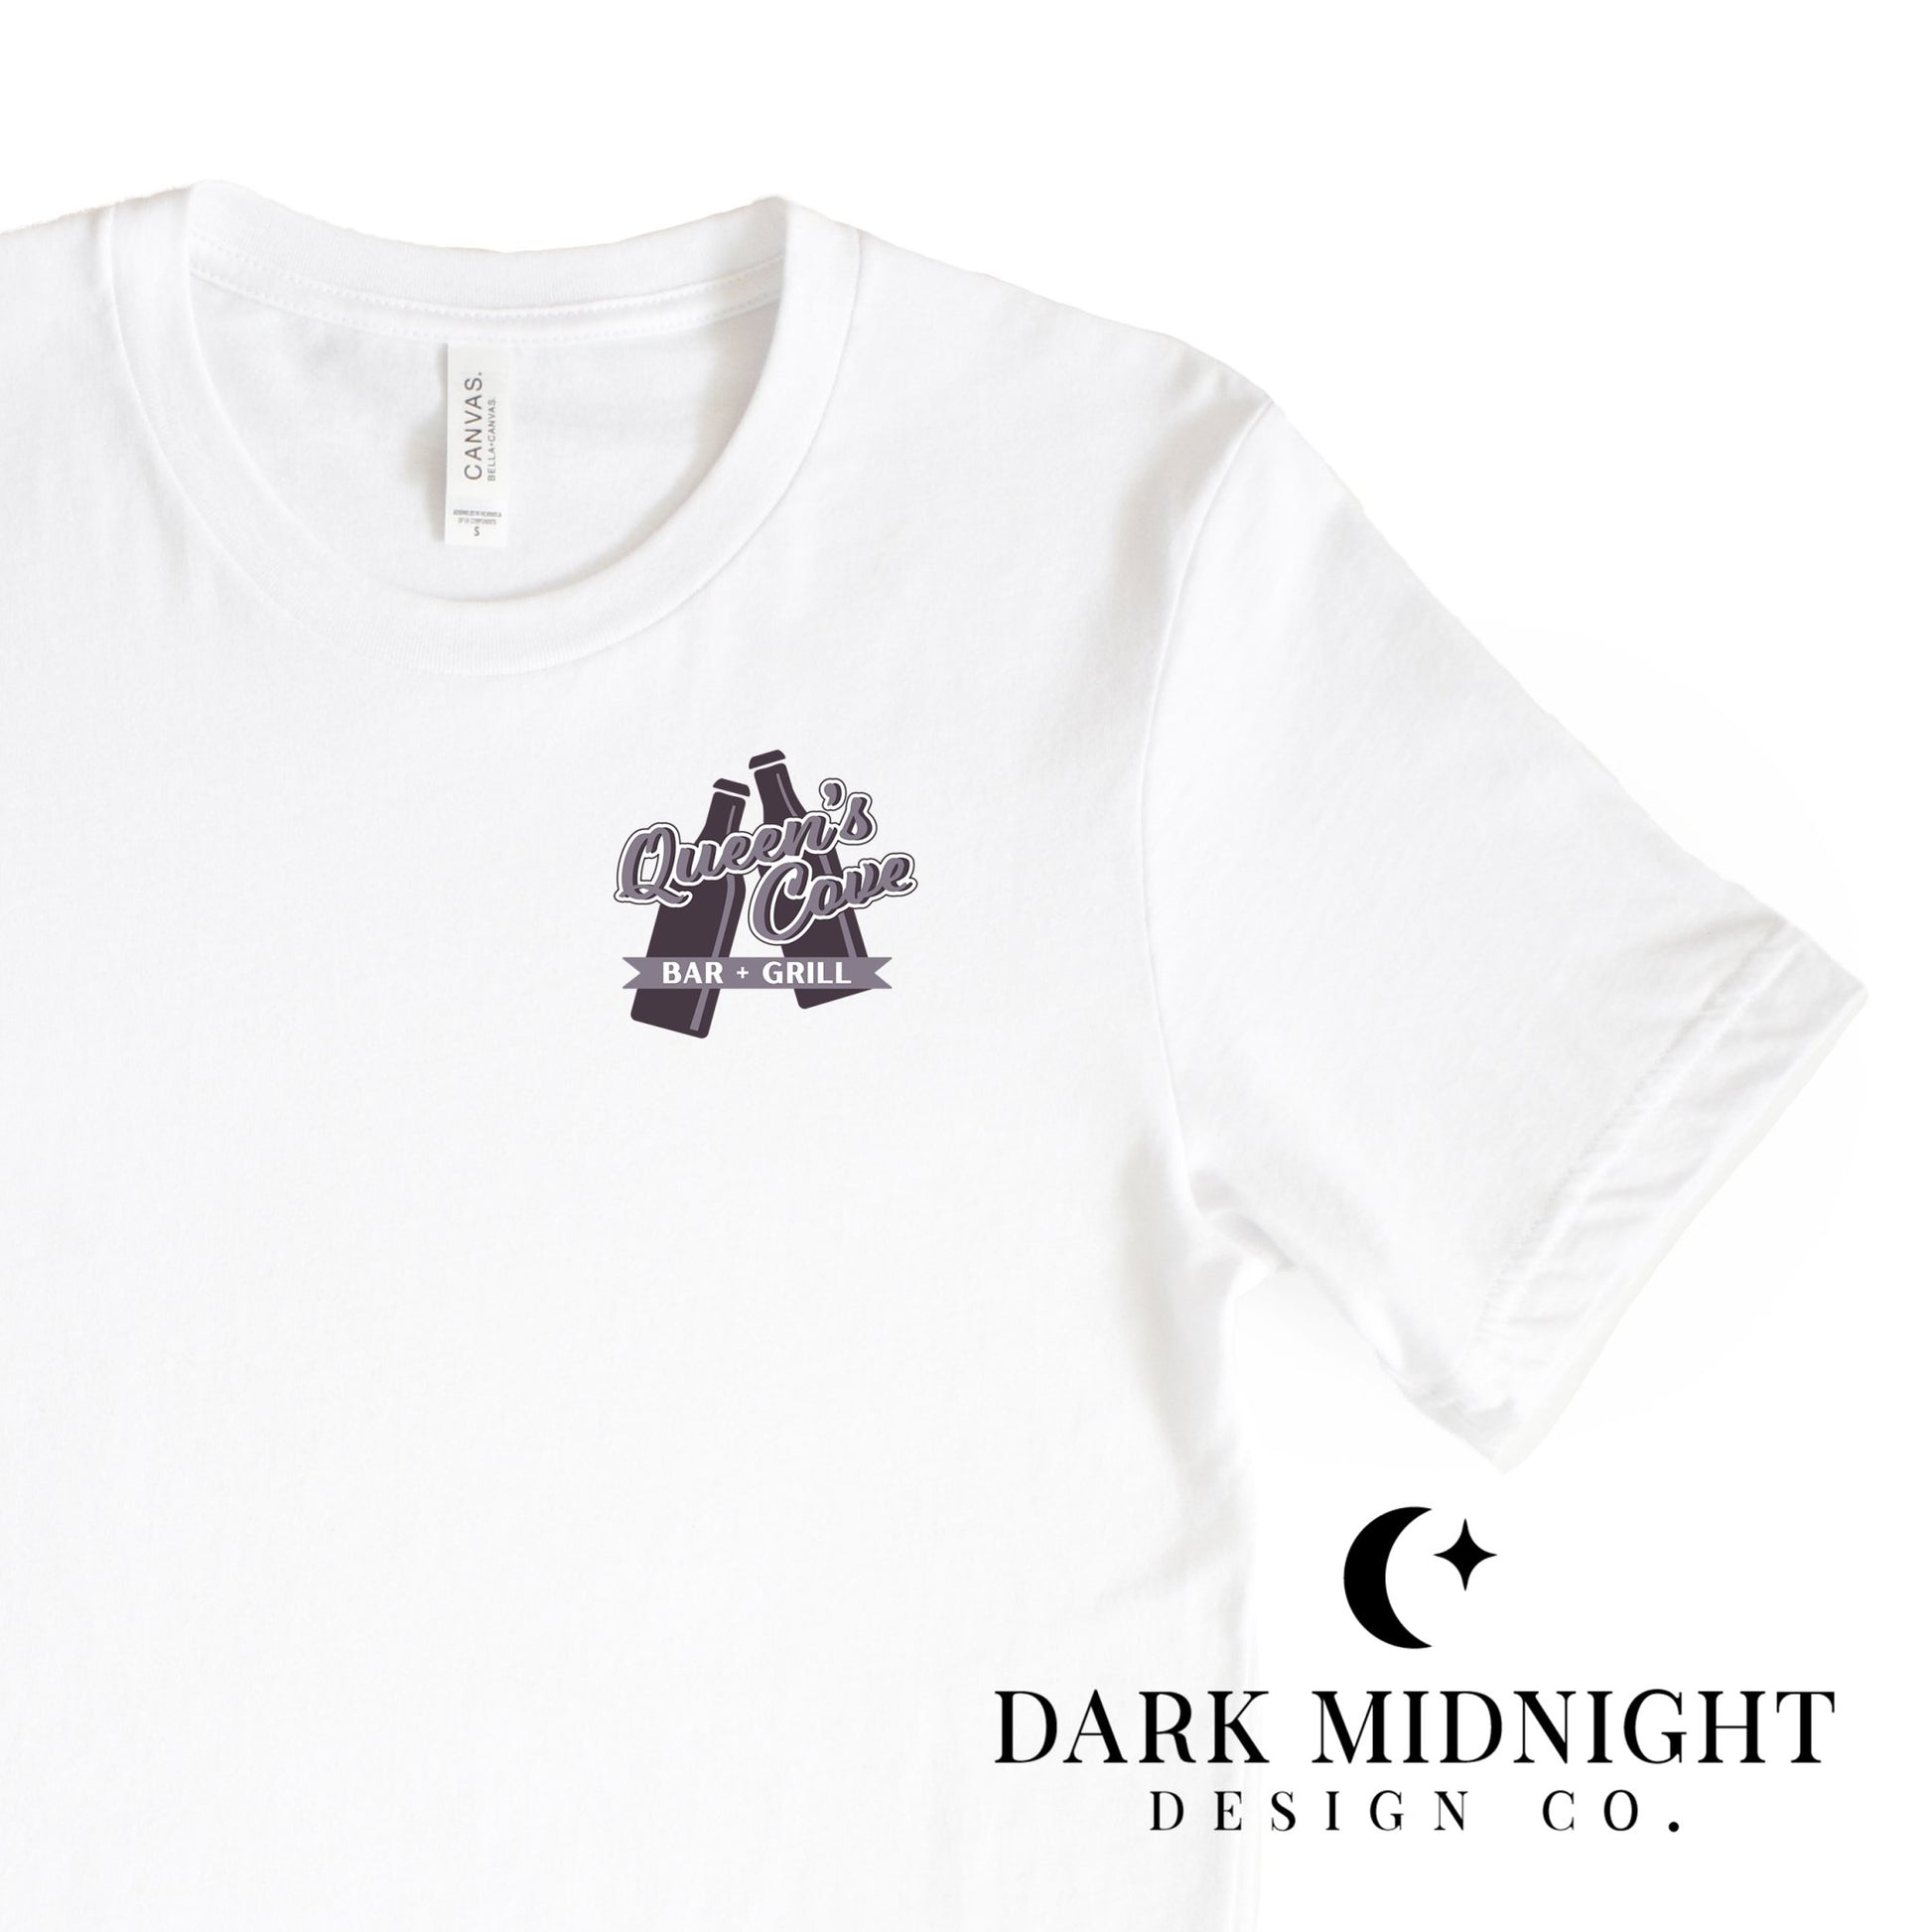 Queen's Cove Bar Logo Tee - Officially Licensed Queen's Cove Series - Dark Midnight Design Co